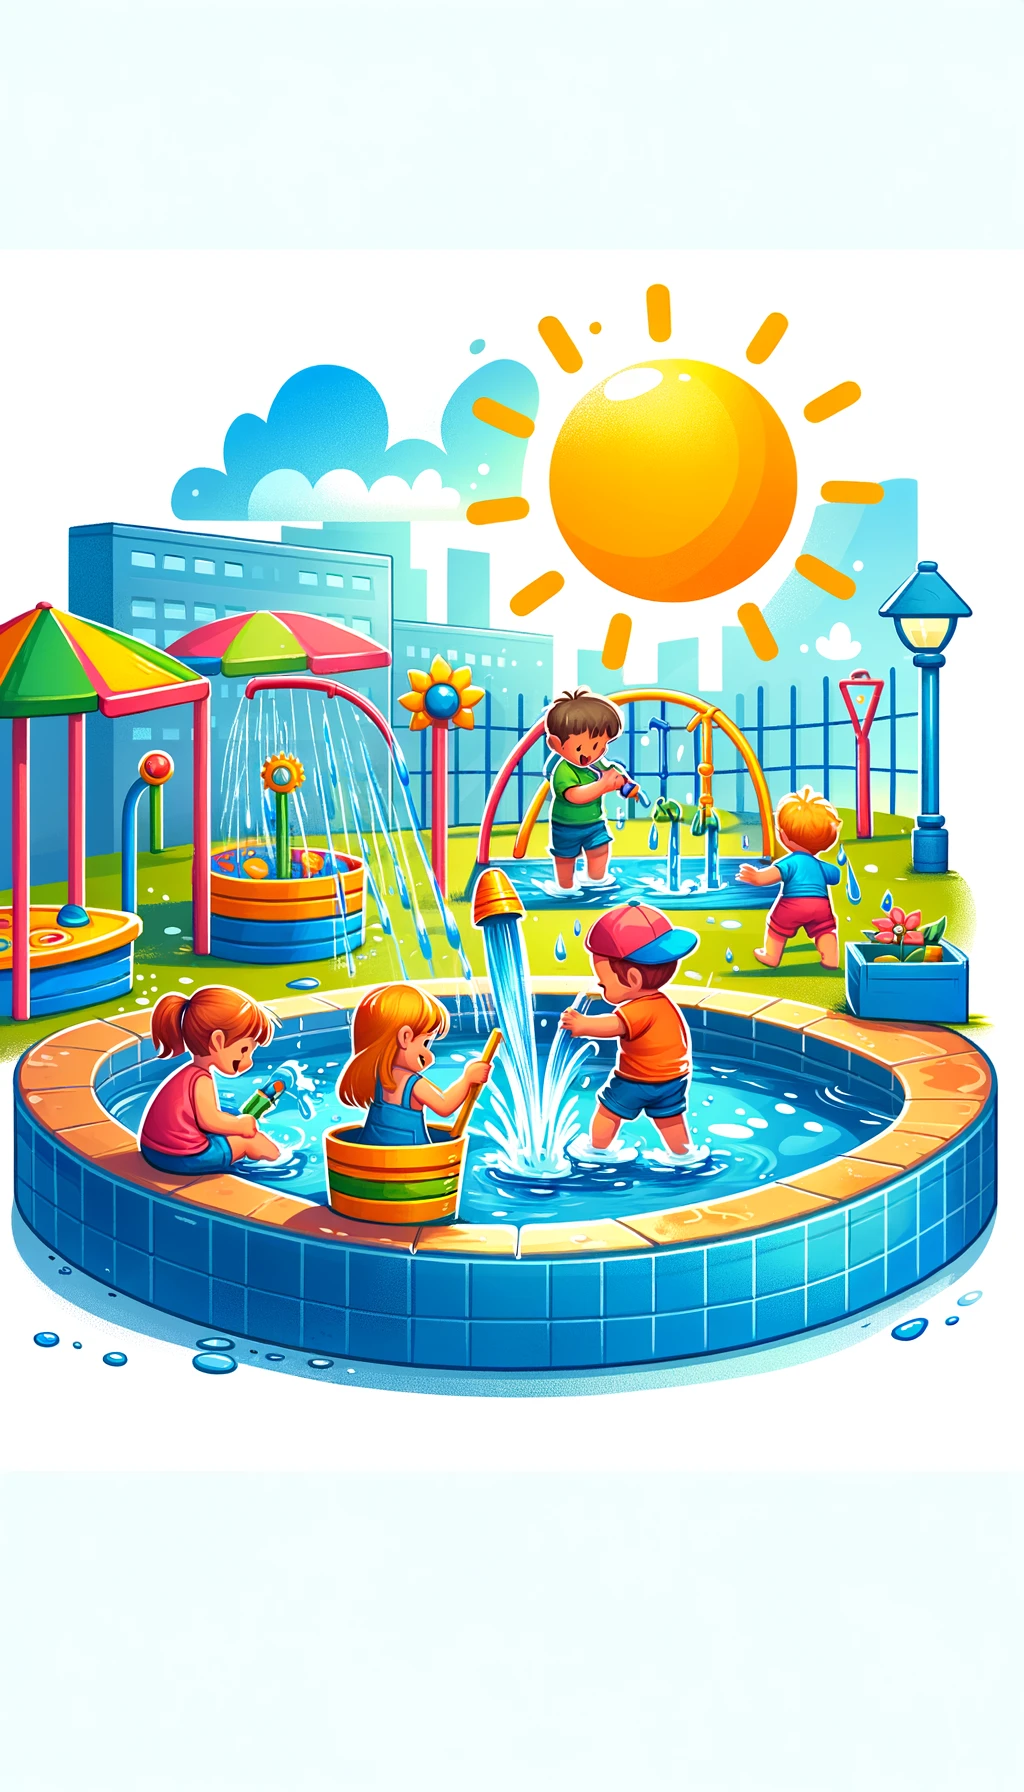 DALL·E 2024 03 09 12.30.05 A colorful illustration of children playing with water in a sunny outdoor setting featuring water tables and sprinklers. The scene is vibrant and pla